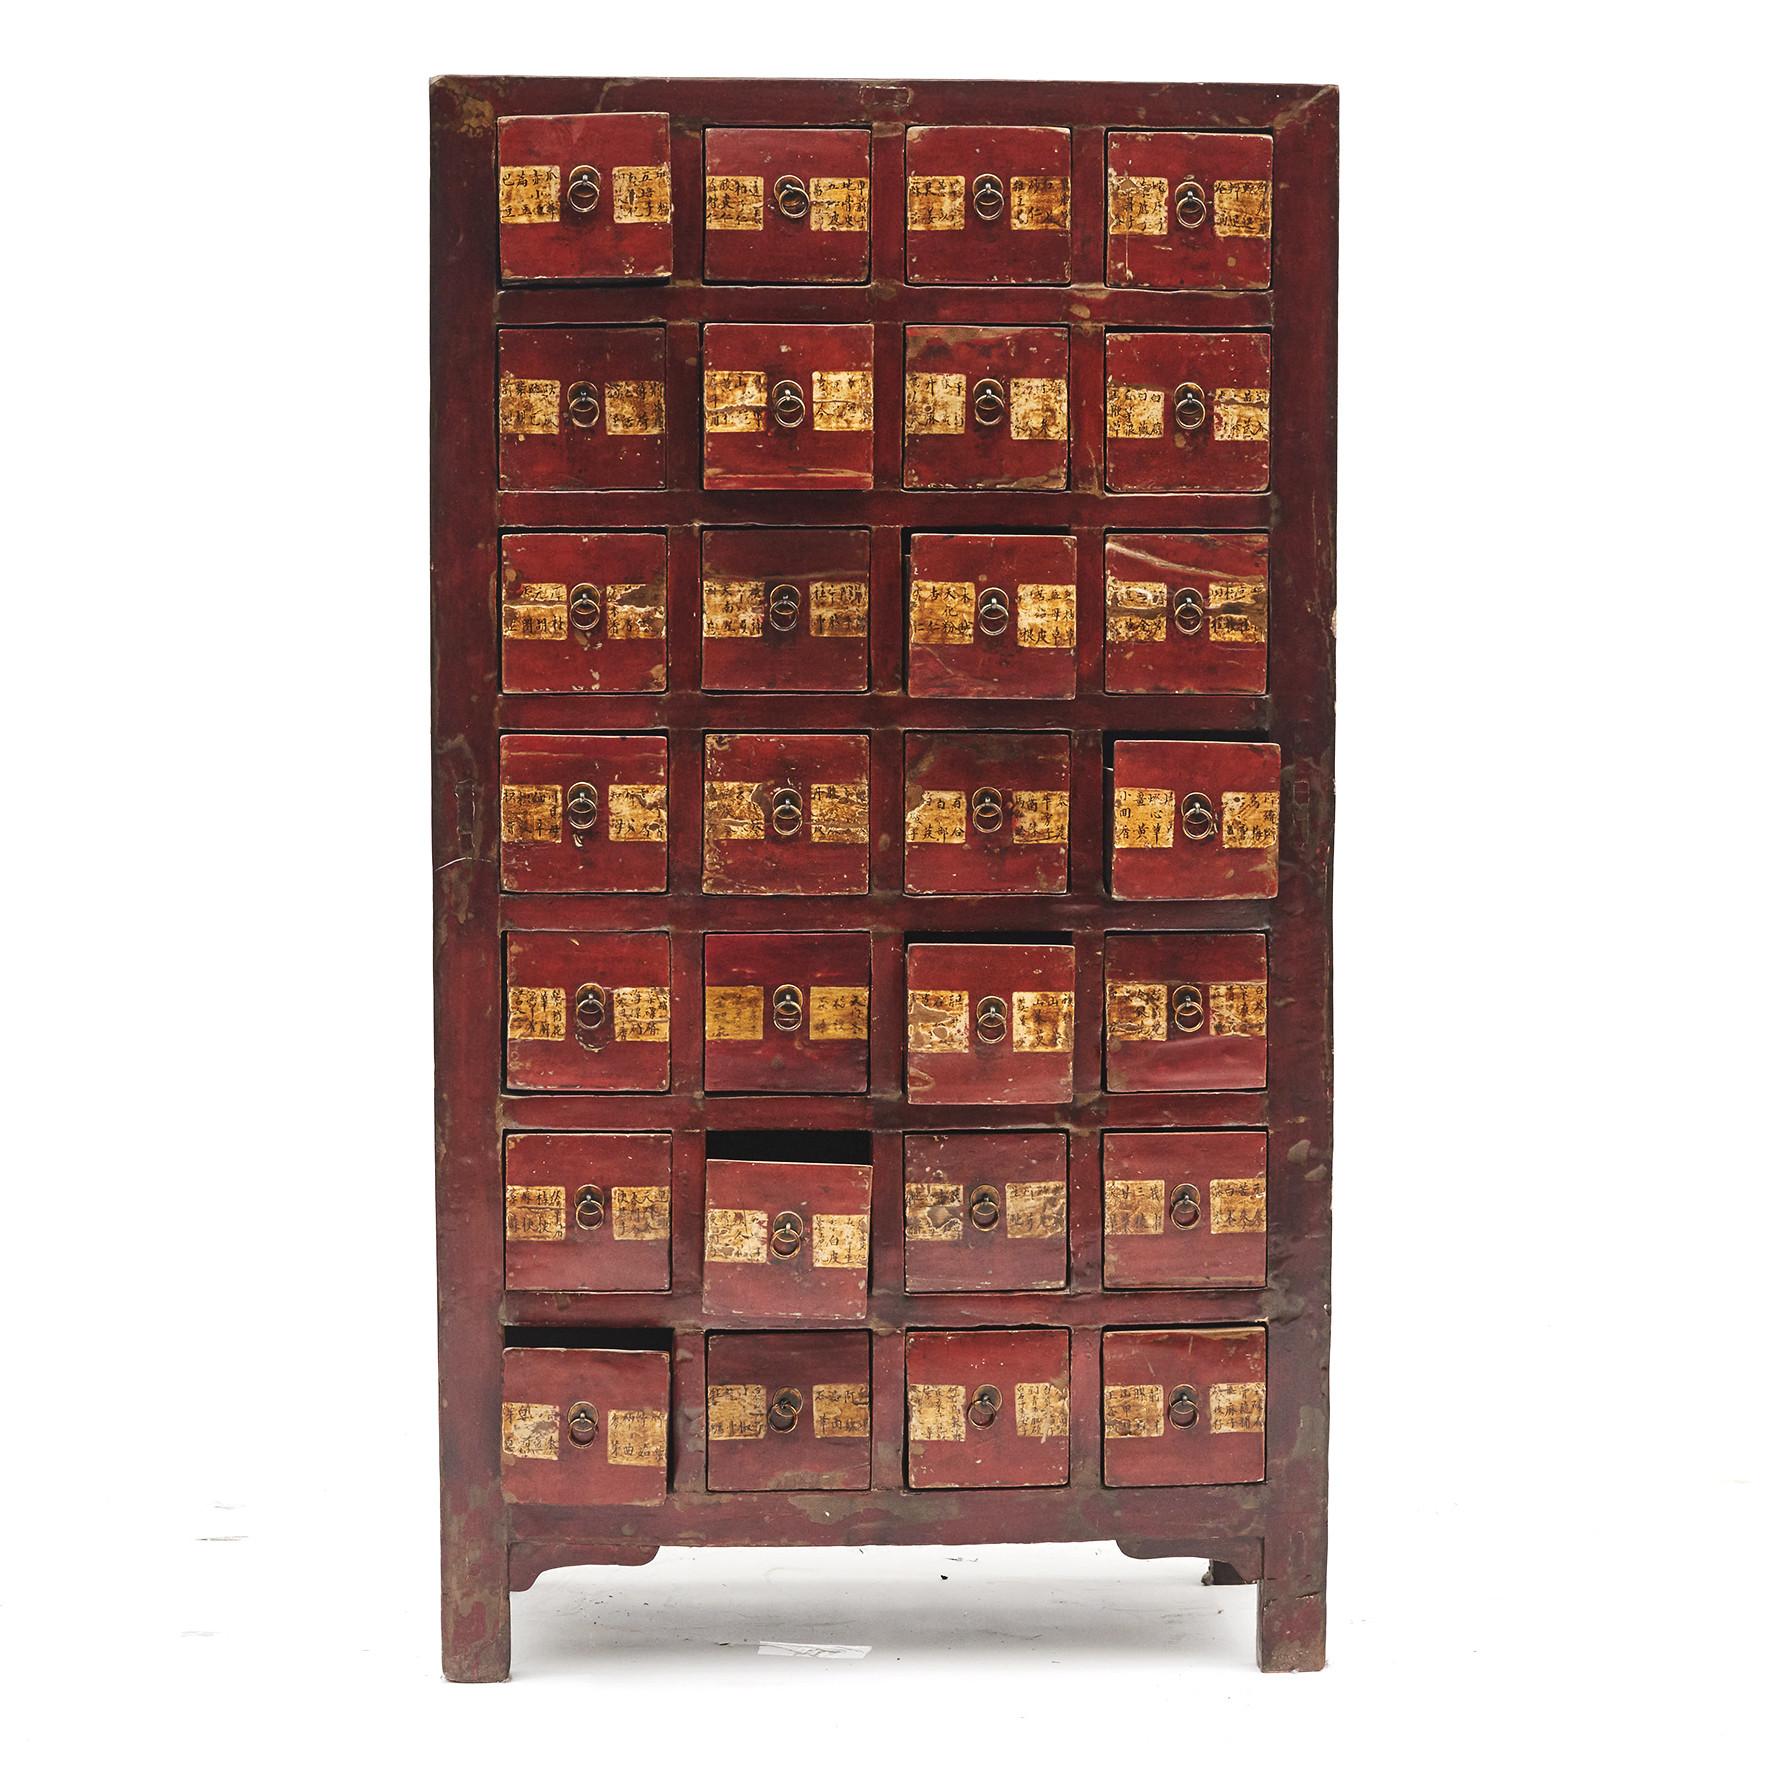 Chinese apothecary medicine chest dating to circa 1840-1850. From the Shanxi province, China.
Original lacquer. Red lacquer on front, black sides.
28 drawers with remains of the descriptions with the name of different medicinal